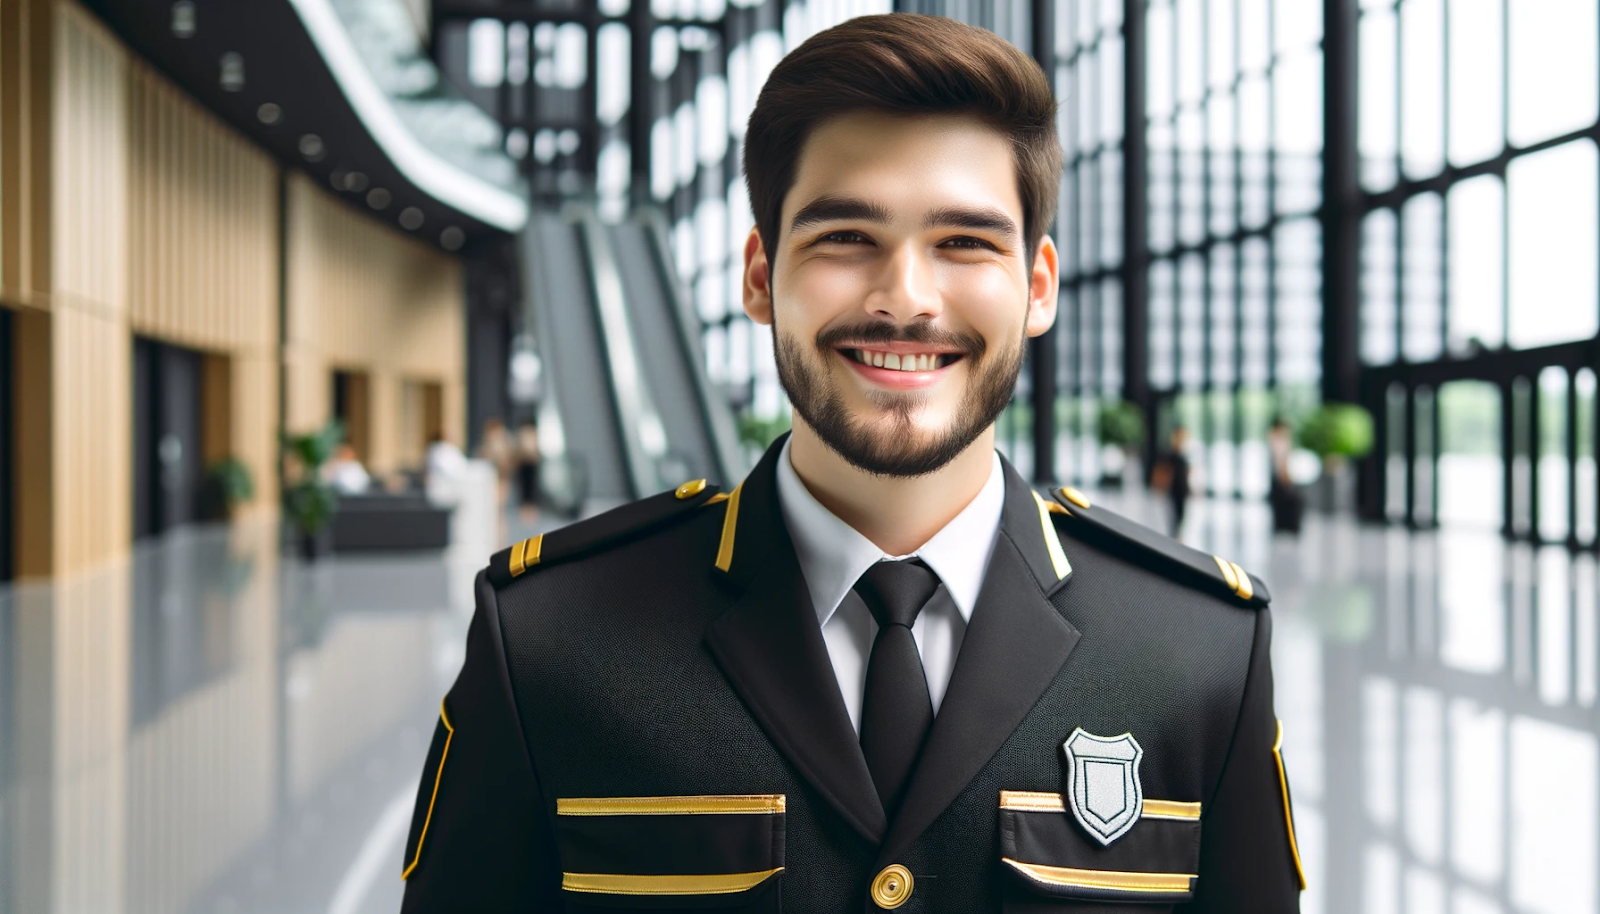 Cheerful security guard in uniform with black and gold colors, representing a safe and positive work environment.